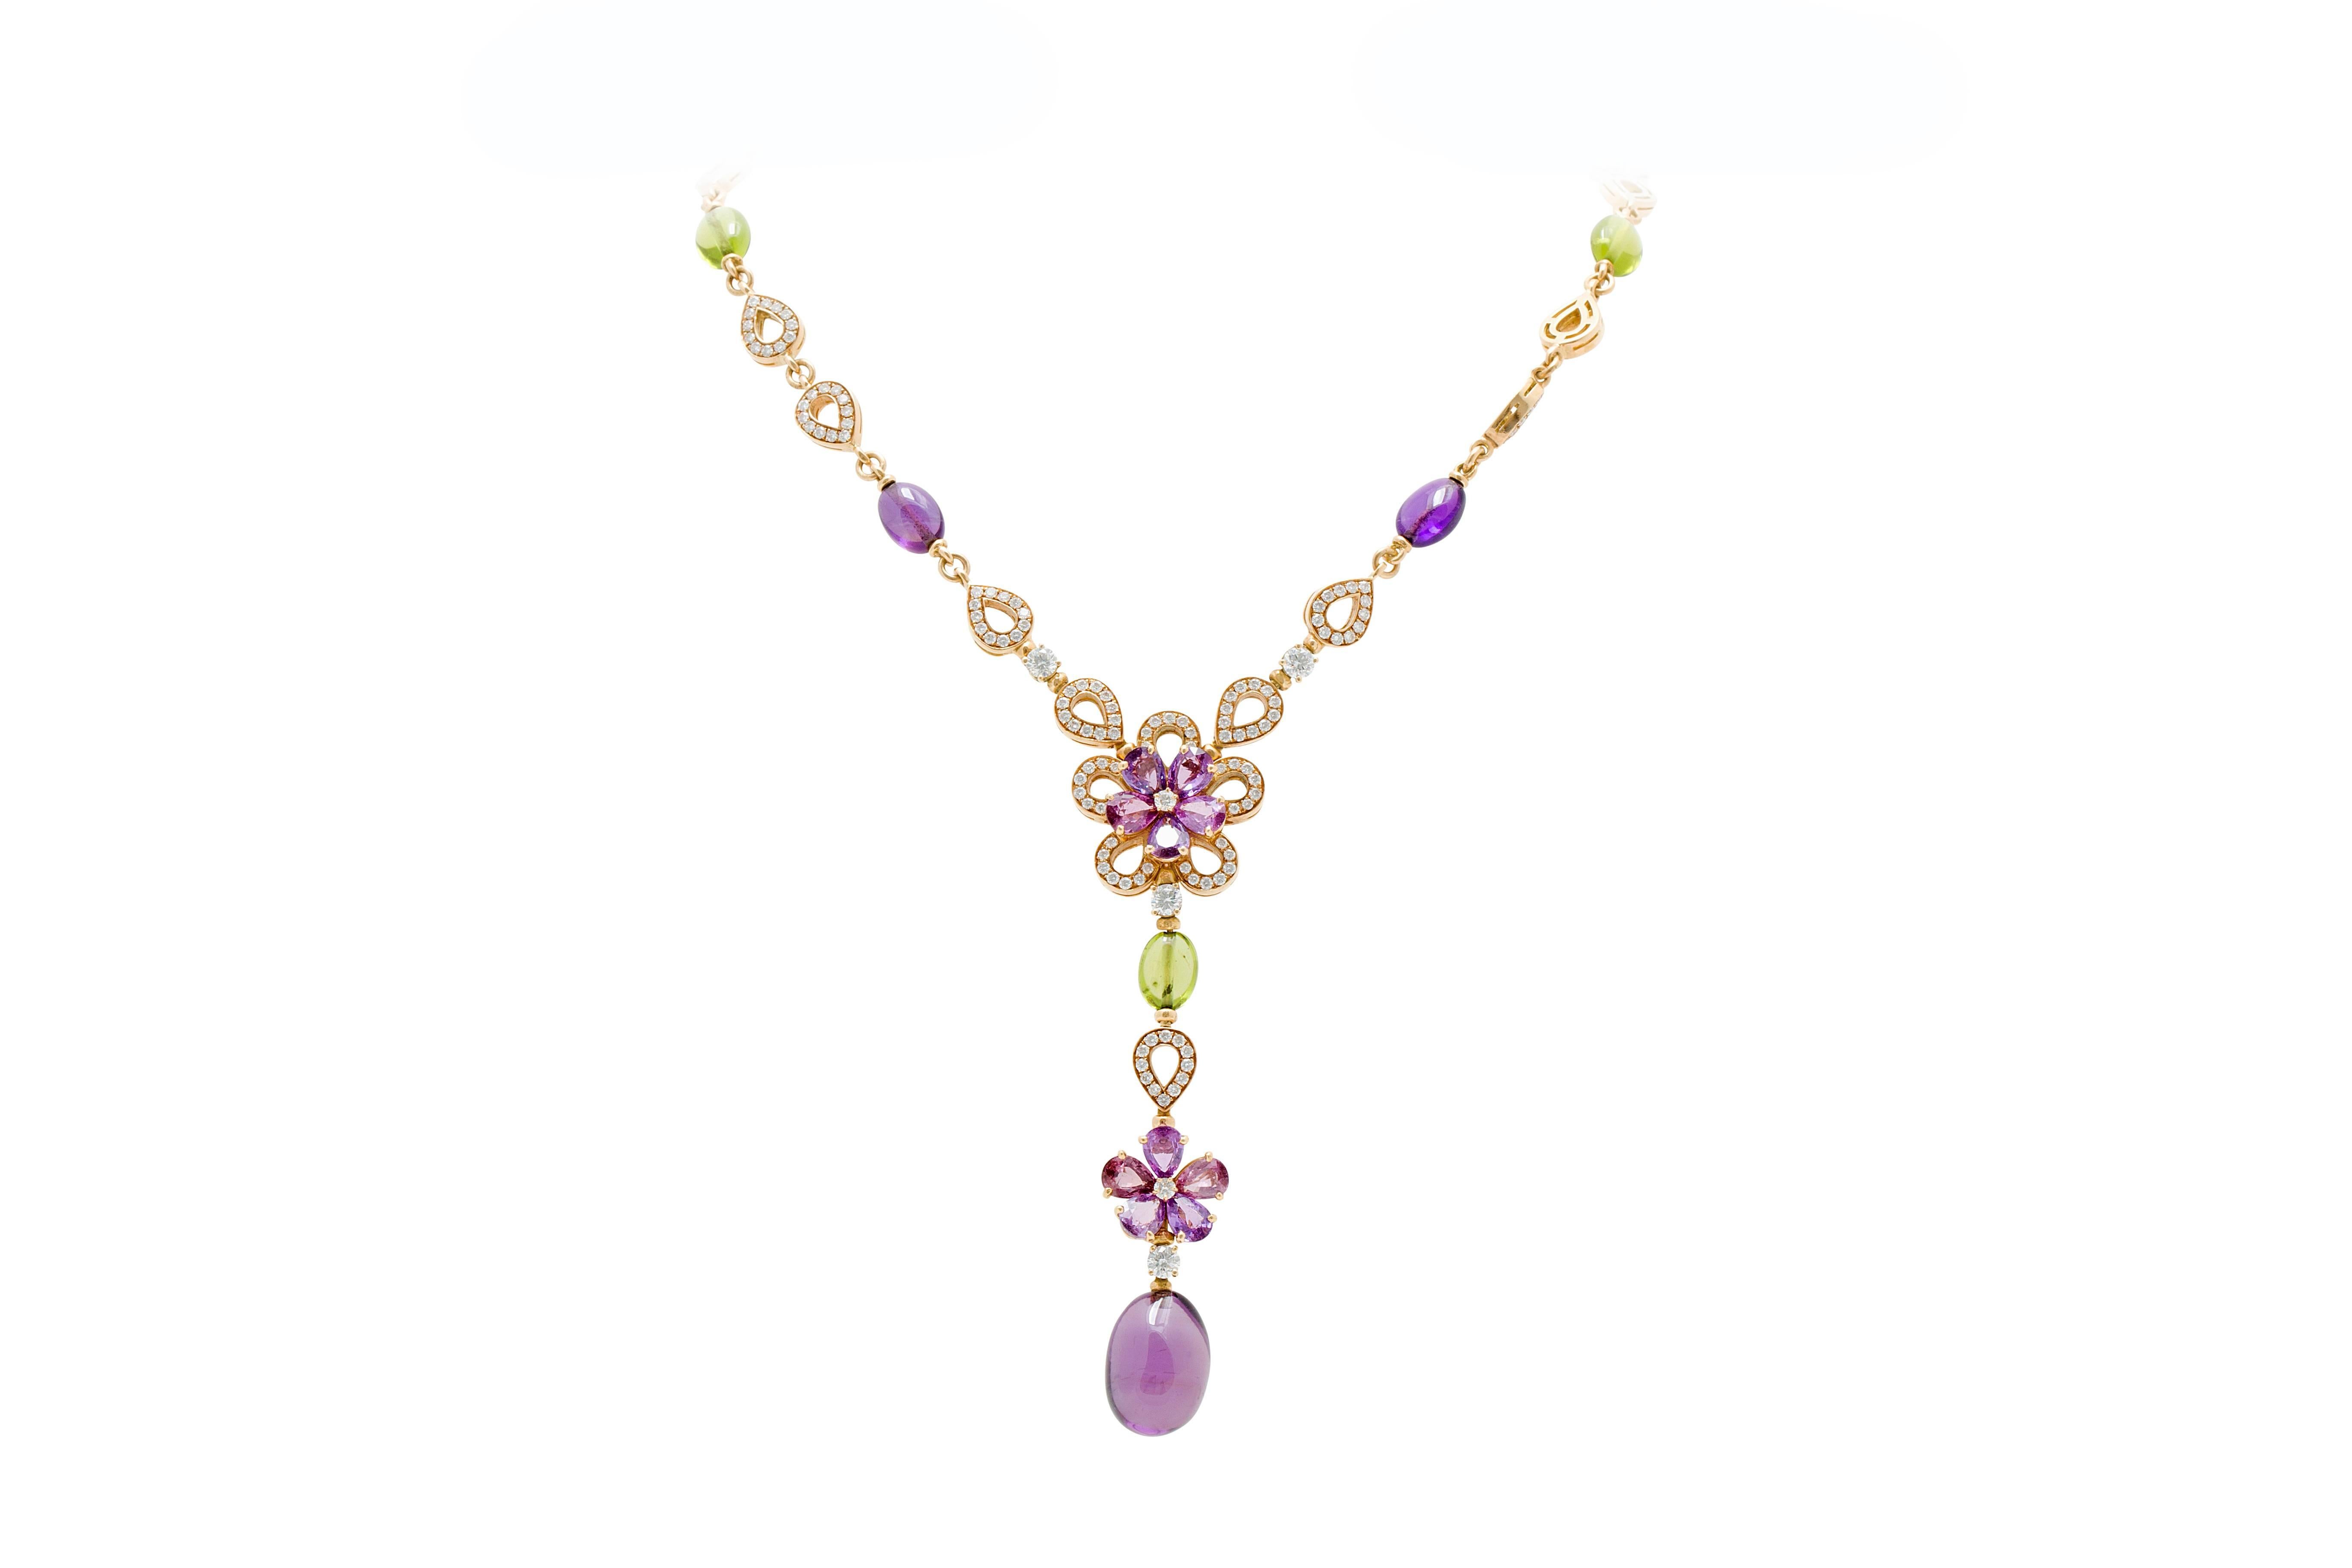 Bulgari Color Collection 18K Yellow Gold Necklace, Earring, and Ring Set with Diamonds, Color Sapphires, Amethyst (Purple), and Peridot (Green). Maximum Necklace Length: 17.00", Necklace Drop: 3.38", Earring Length: 1.50", Ring Size: 